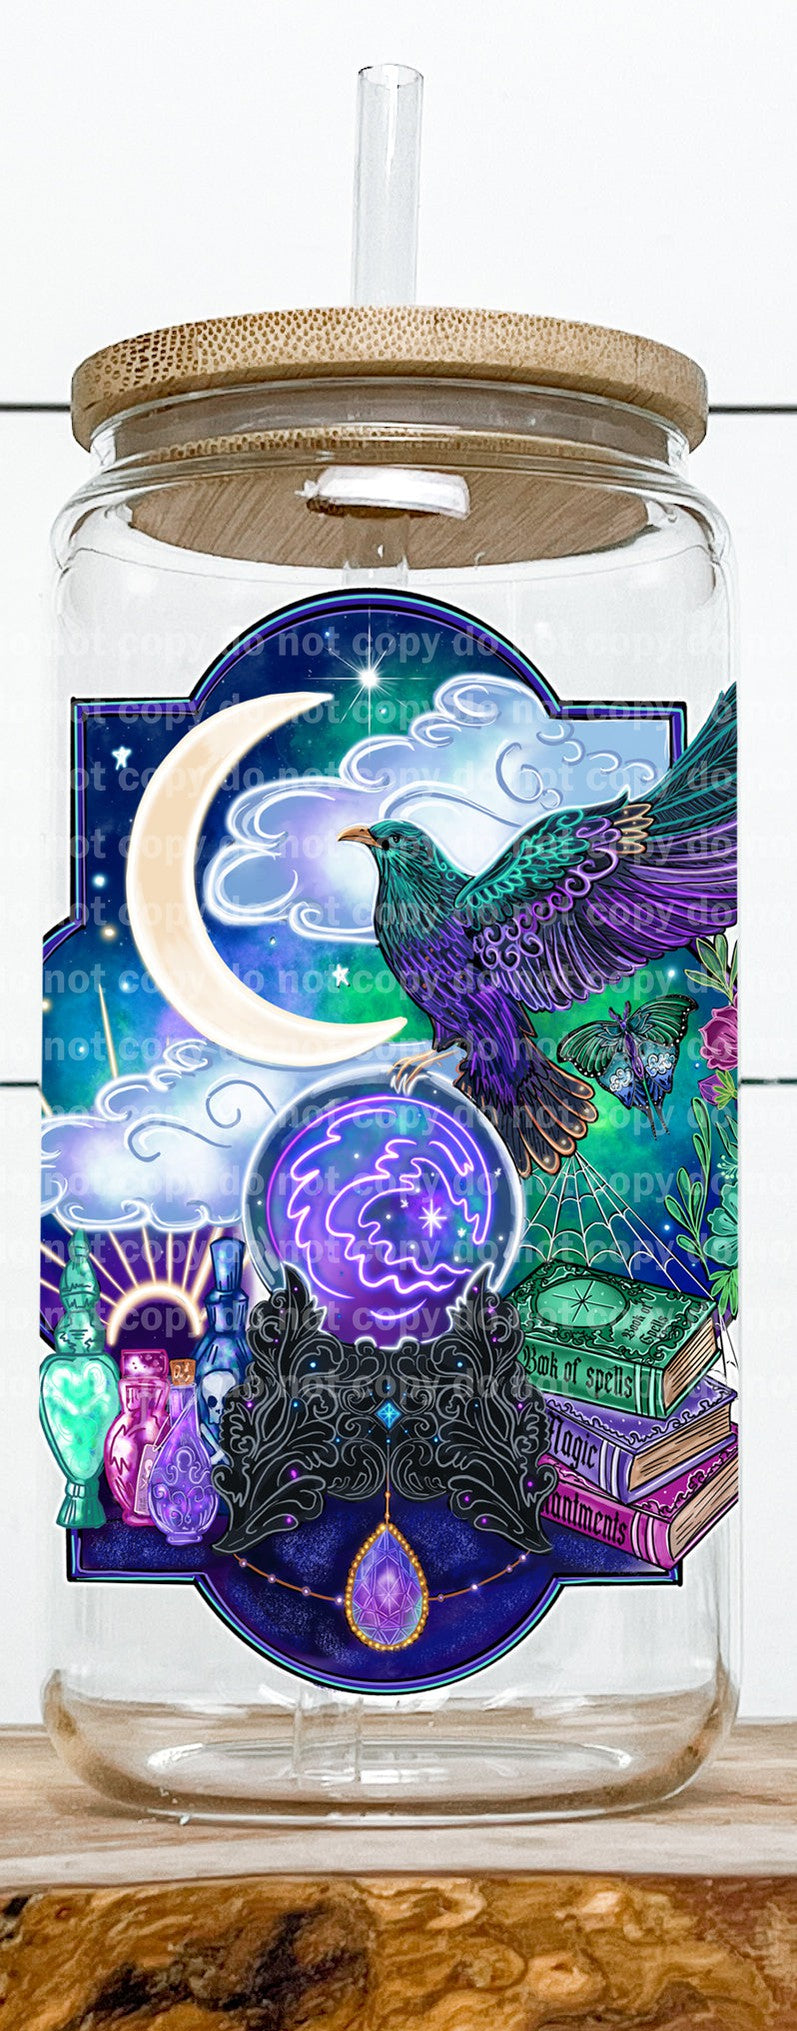 Moon raven spell books crystal ball Decal 3.6 x 4.5